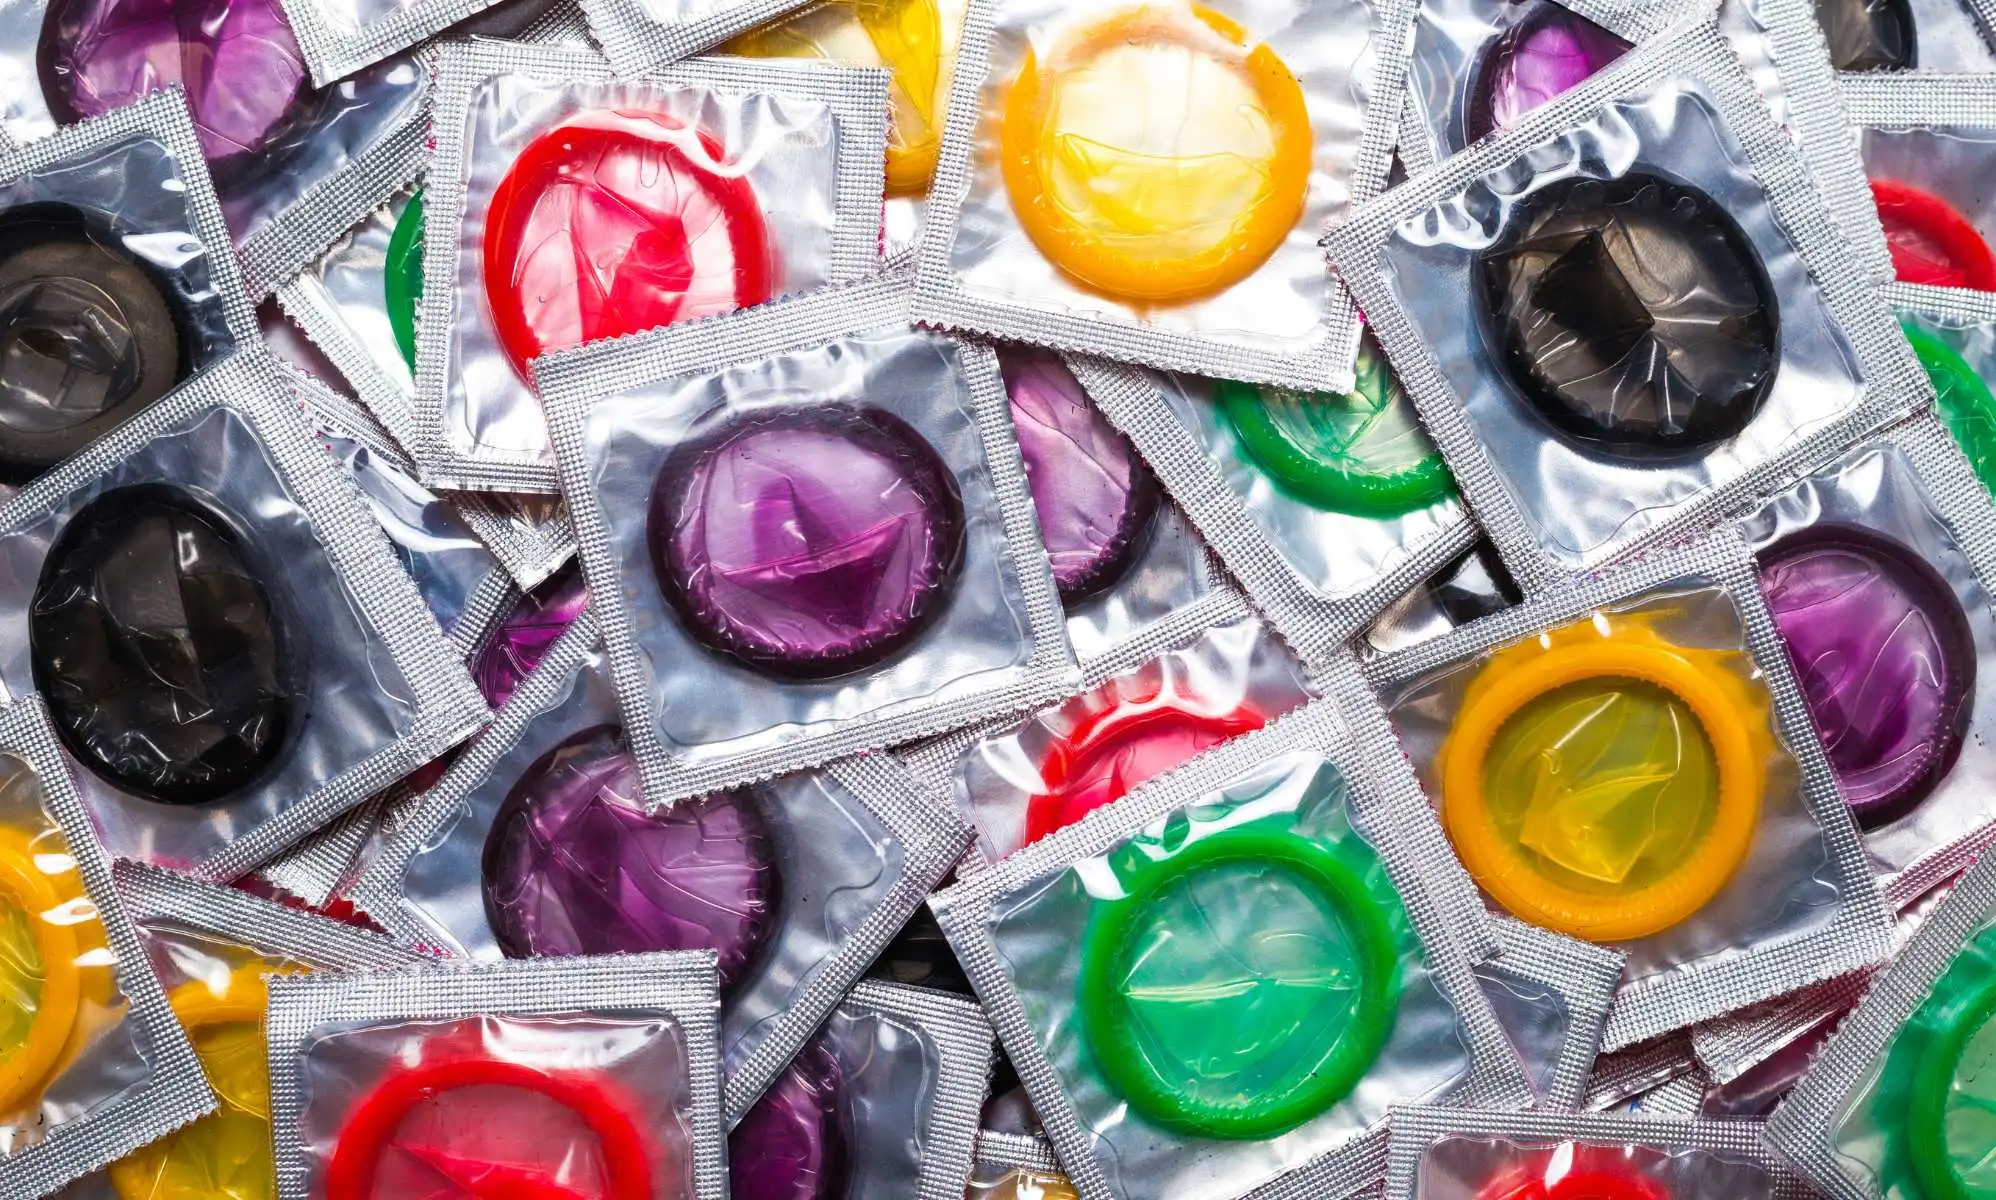 Paris Olympics to provide 300,000 condoms for athletes as sex ban lifted